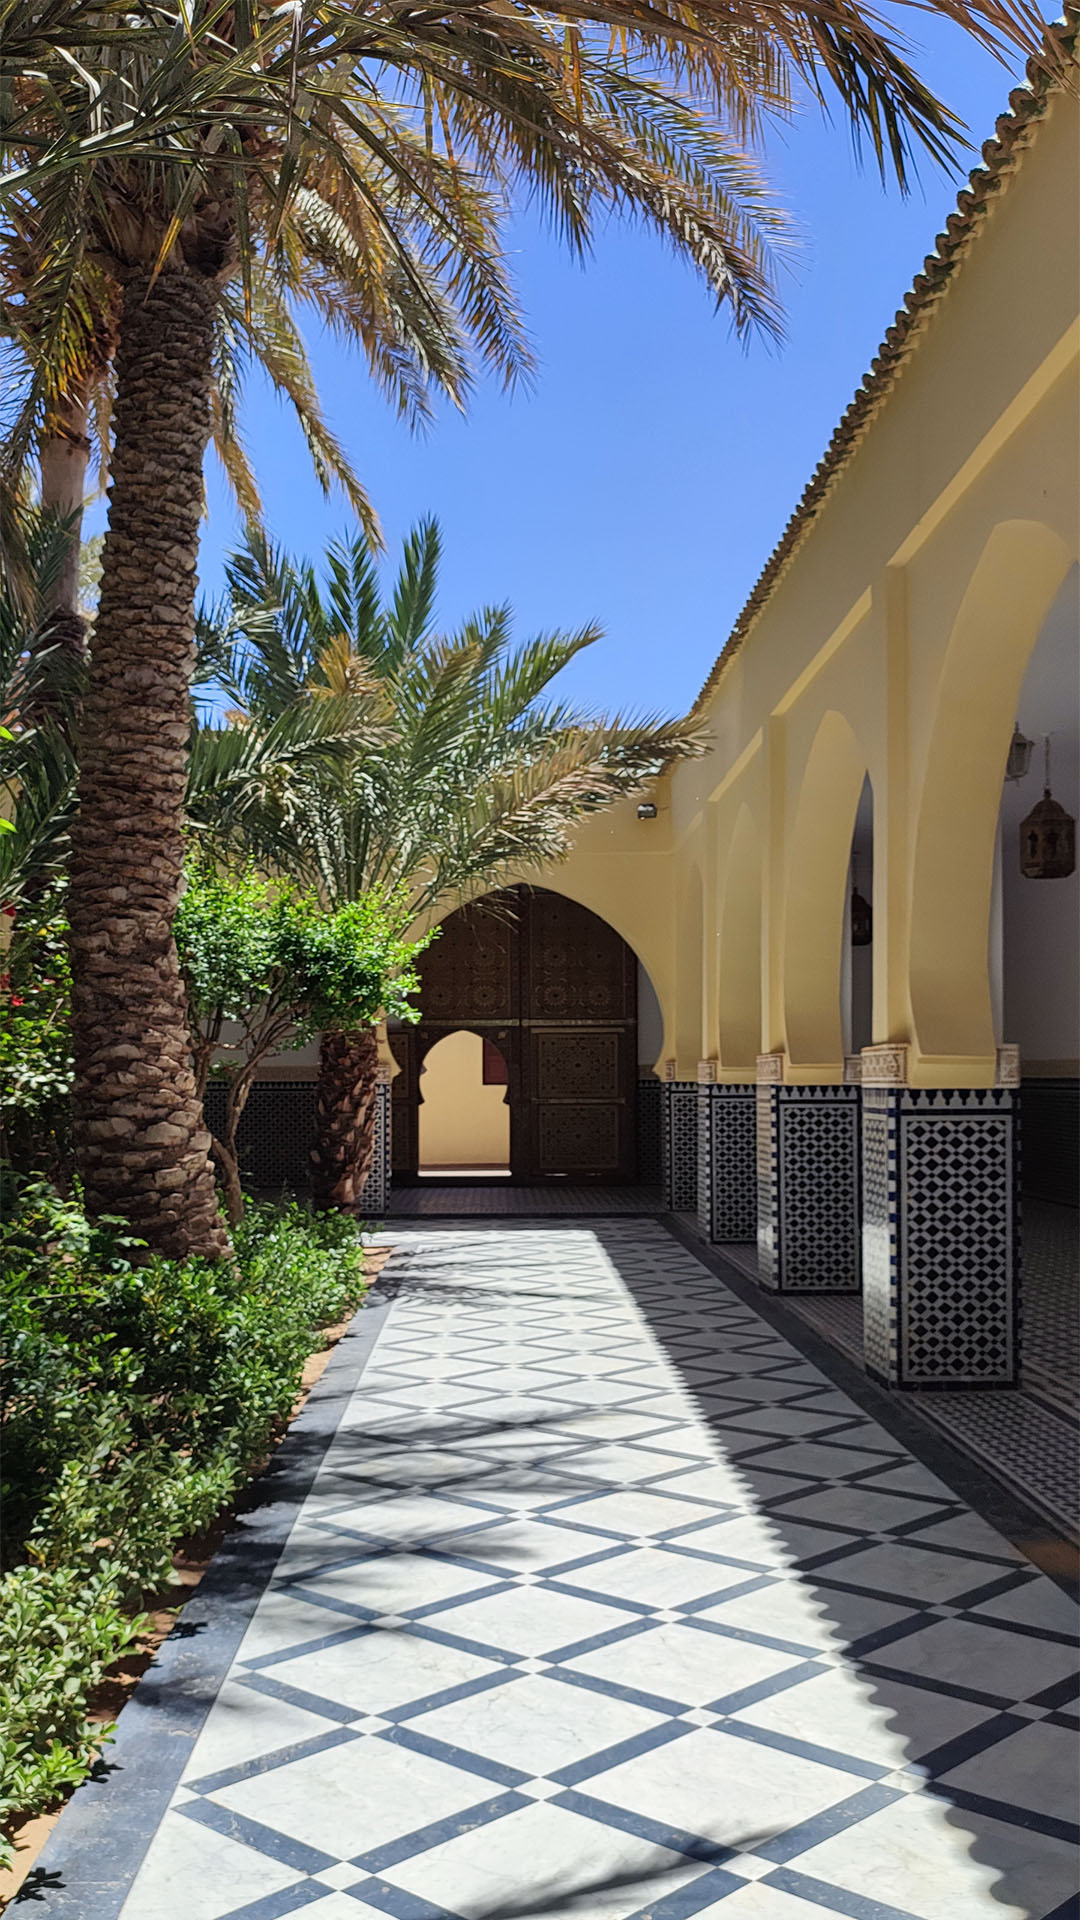 Sunlit Moroccan courtyard at Mausoleum of Moulay Ali Cherif.